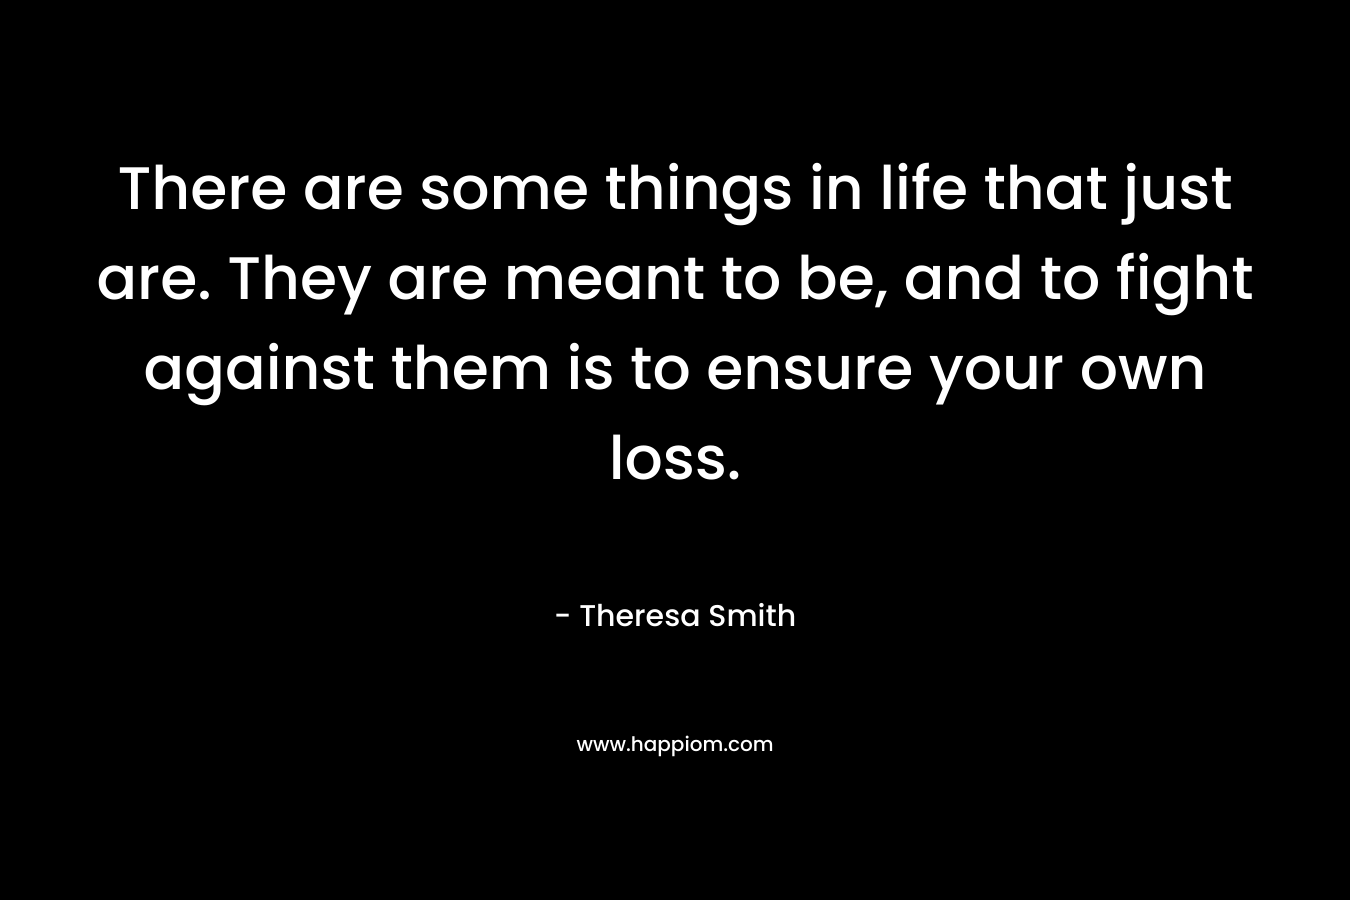 There are some things in life that just are. They are meant to be, and to fight against them is to ensure your own loss.